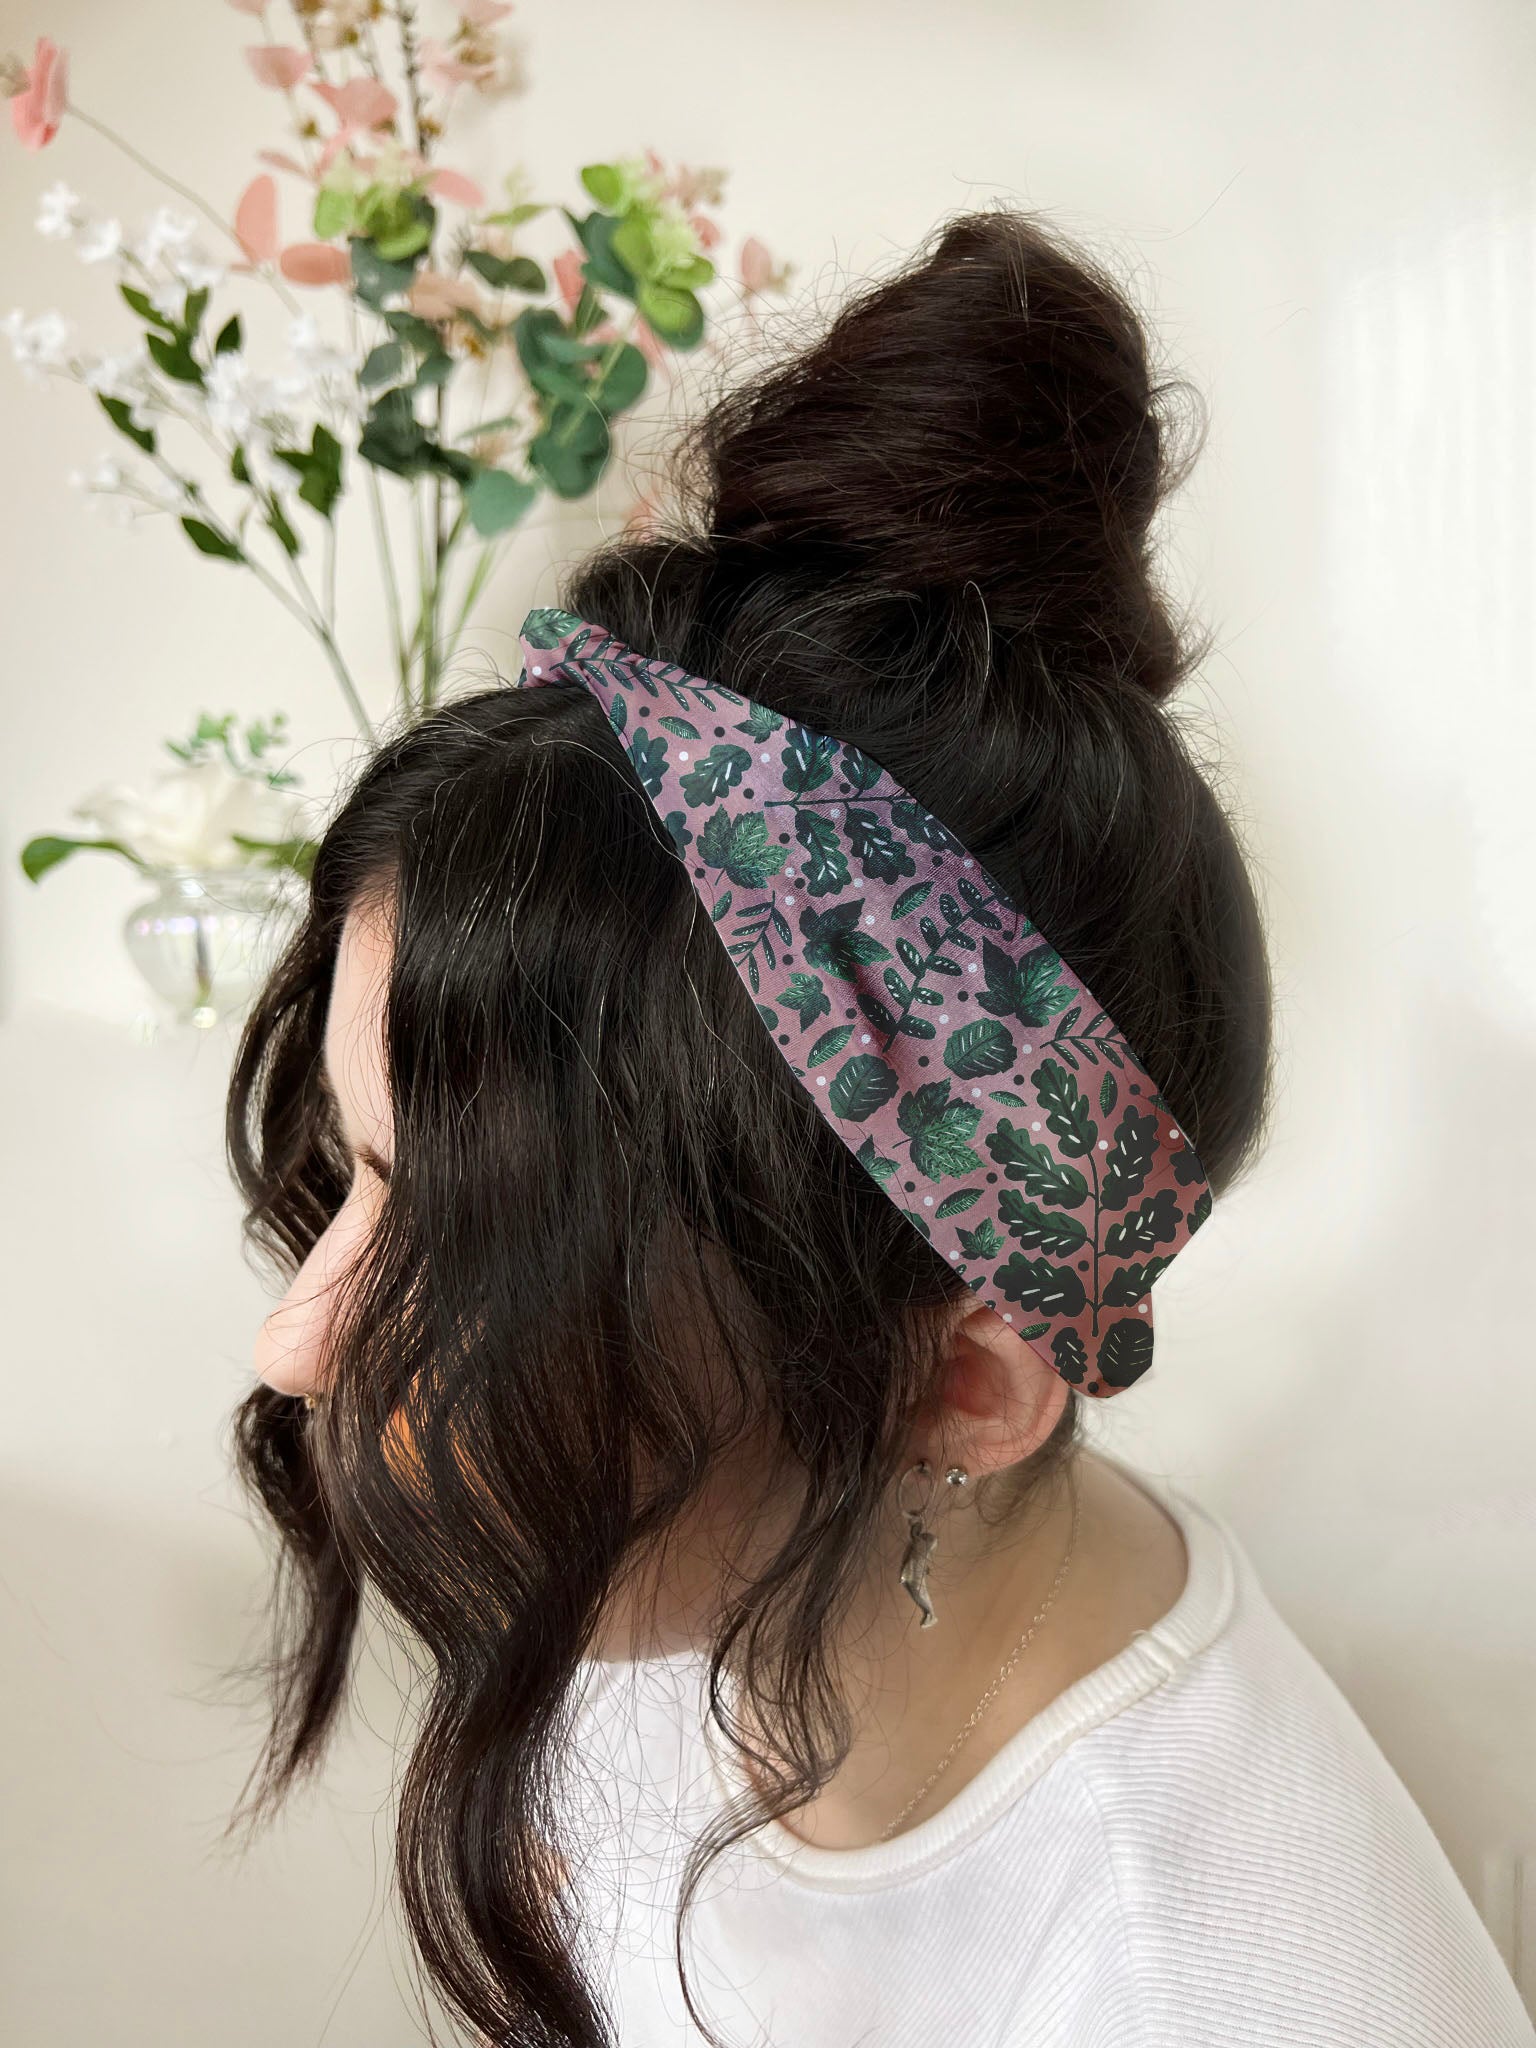 dark haired girl wears headband around her head with a bun in the back. The headband has a green foliage pattern illustrated on it. Shop gifts just because for her here.